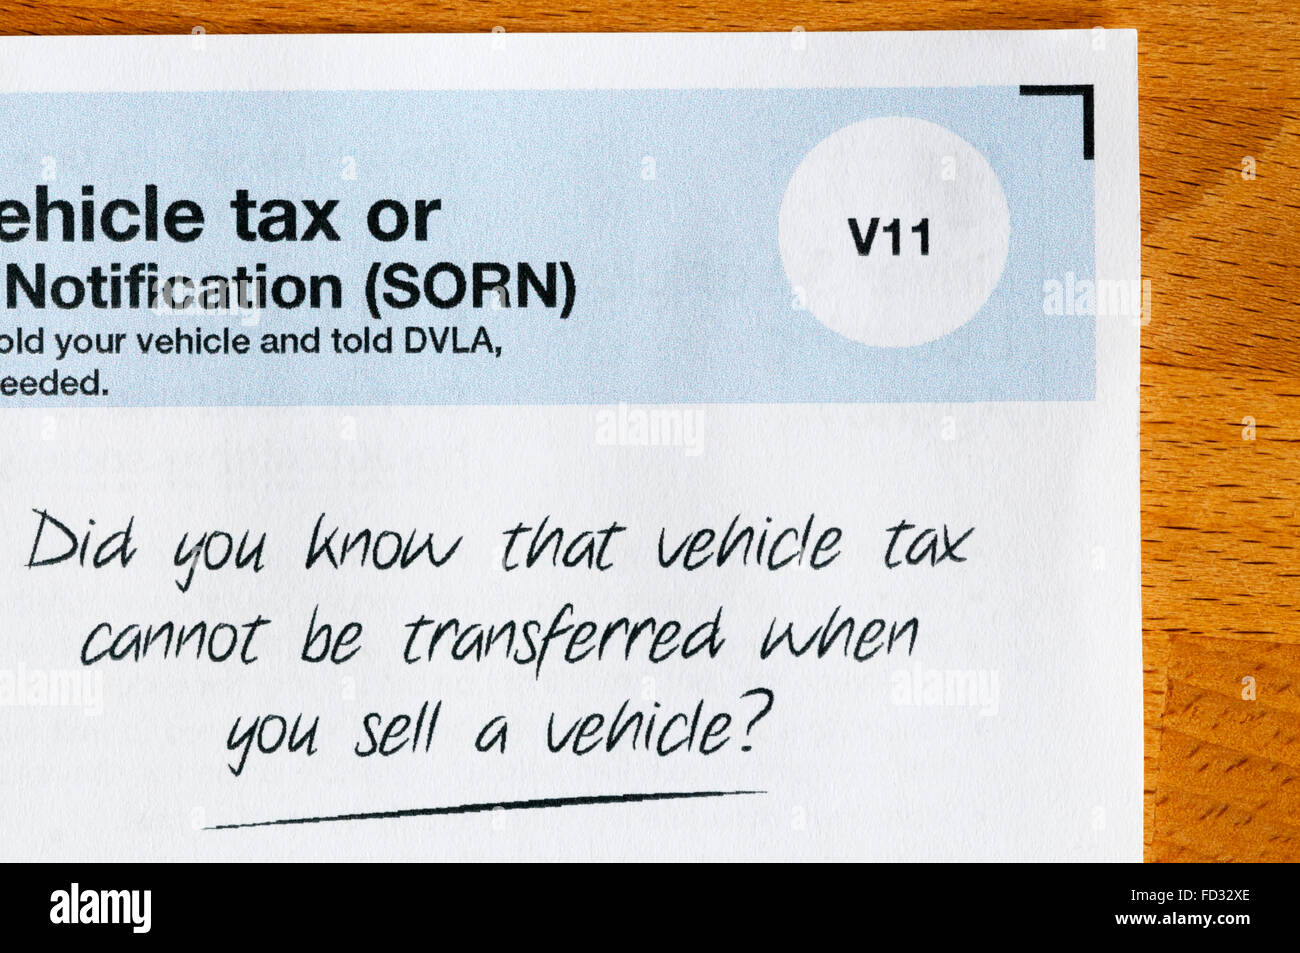 A reminder from the DVLA that vehicle tax cannot be transferred when a vehicle is sold. Stock Photo